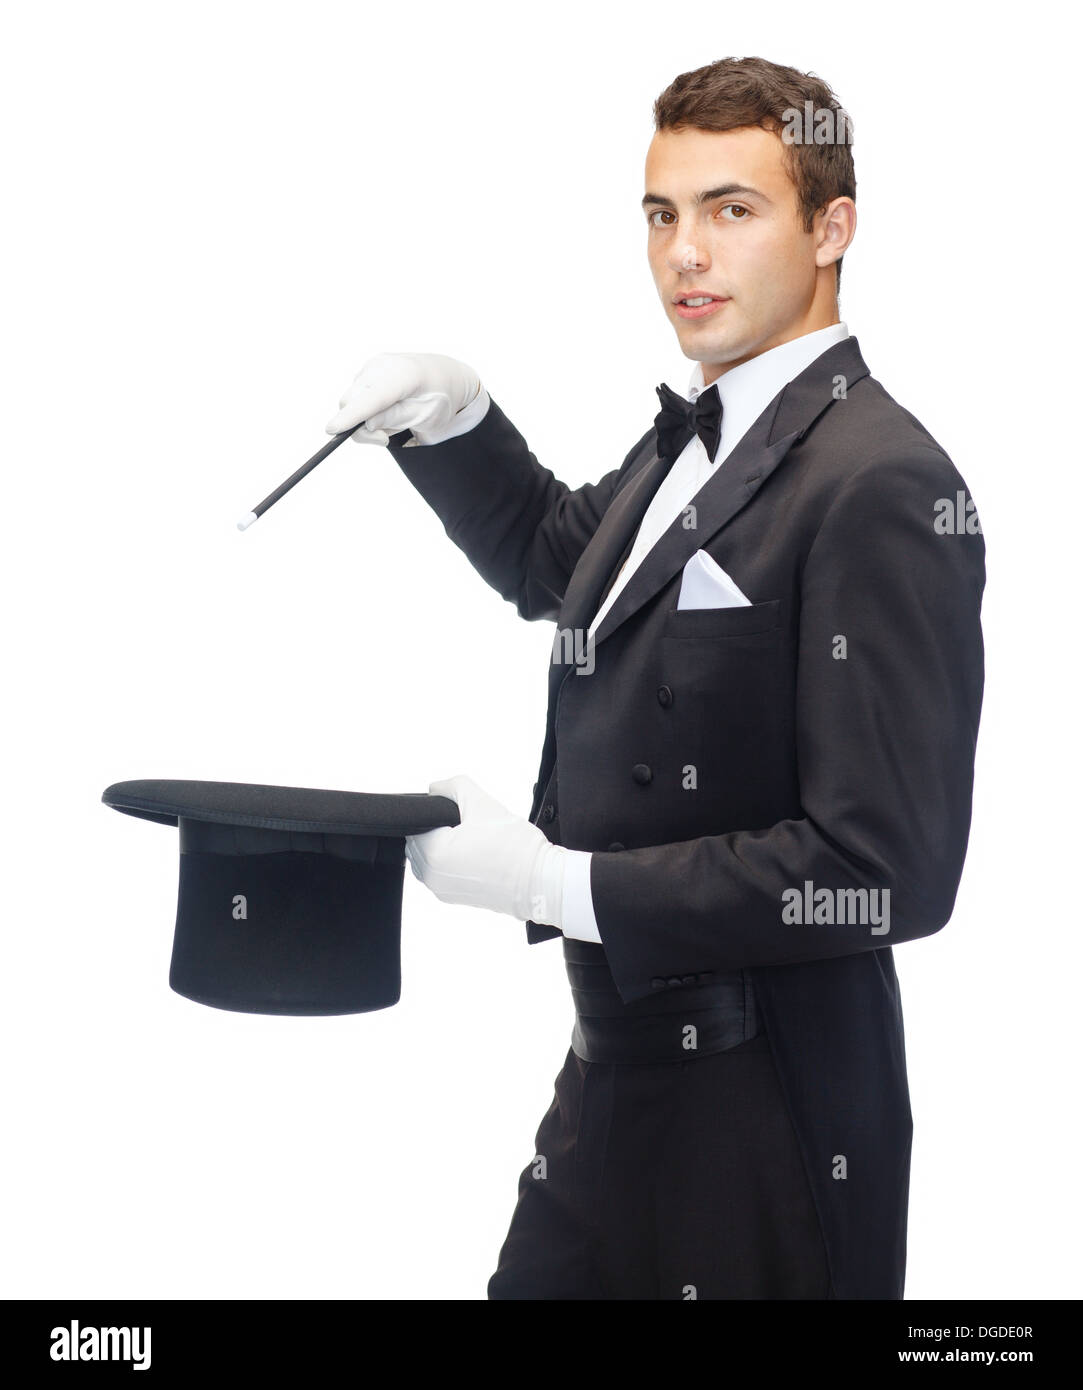 magician in top hat with magic wand showing trick Stock Photo